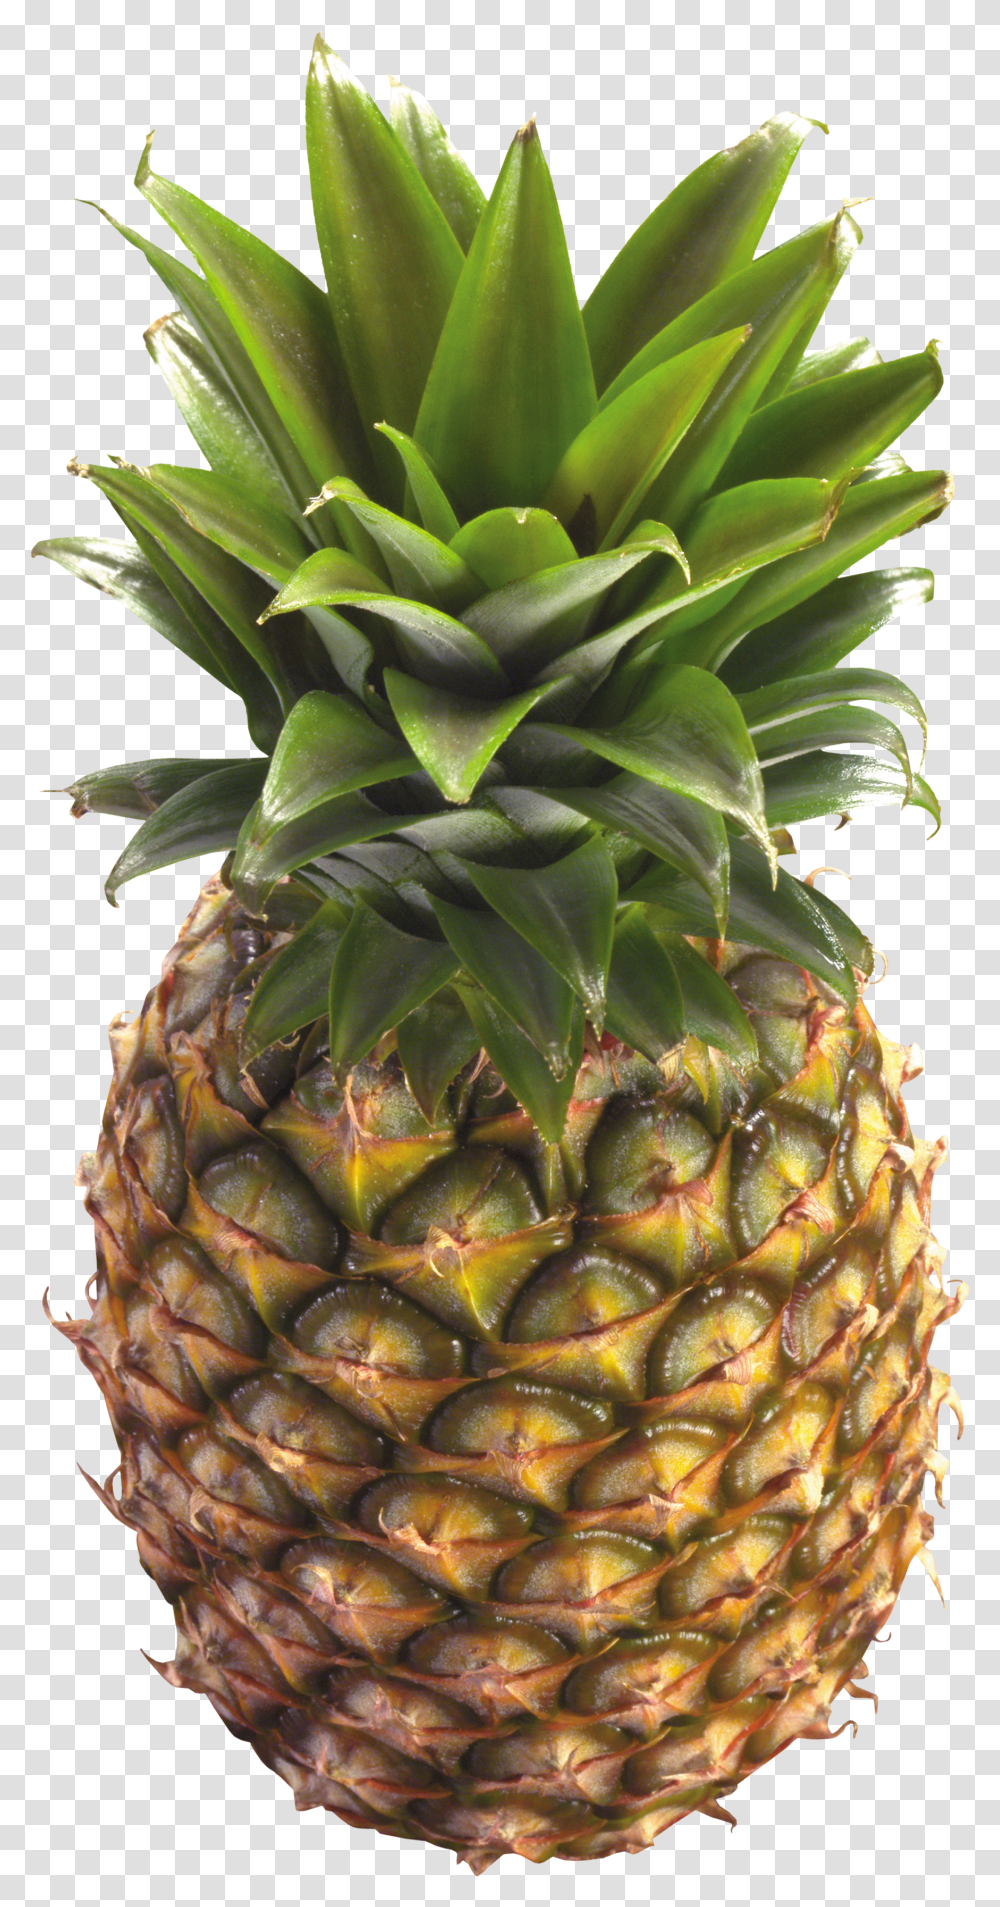 Pineapple Images Free Pictures Download Pineapple With No Background Transparent Png